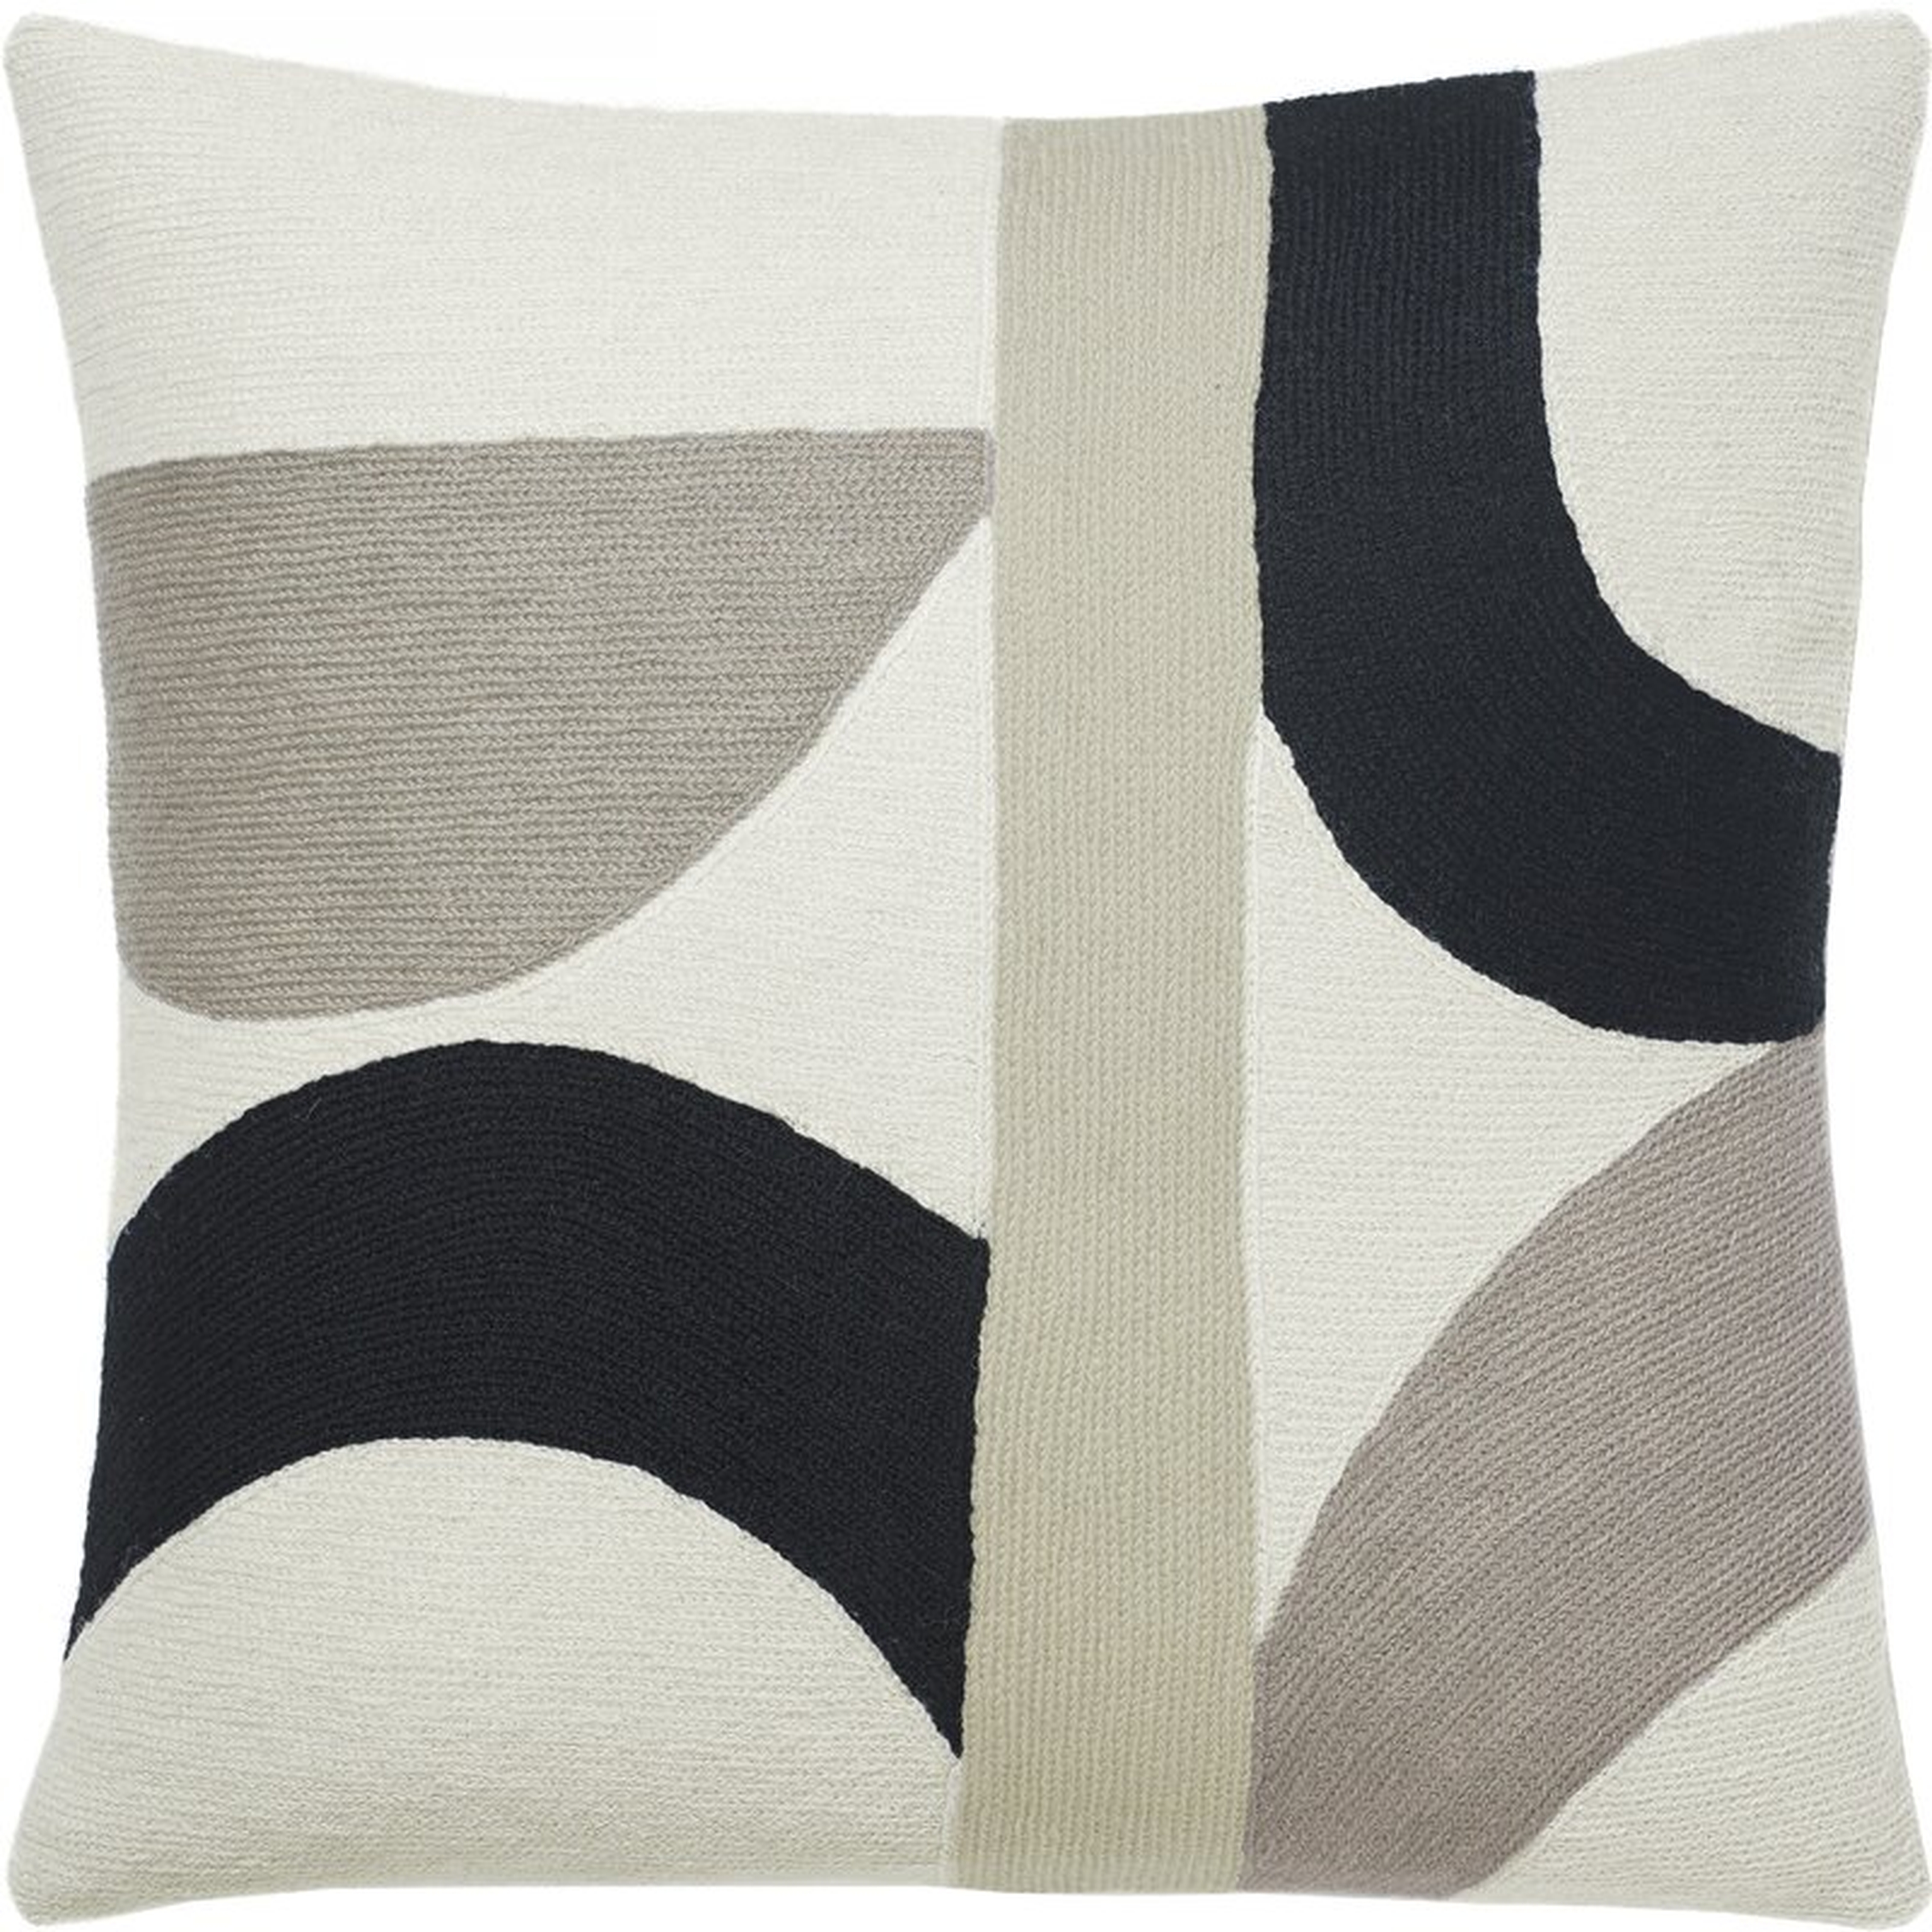 Judy Ross Textiles Eclipse Square Wool Pillow Cover & Insert - Perigold